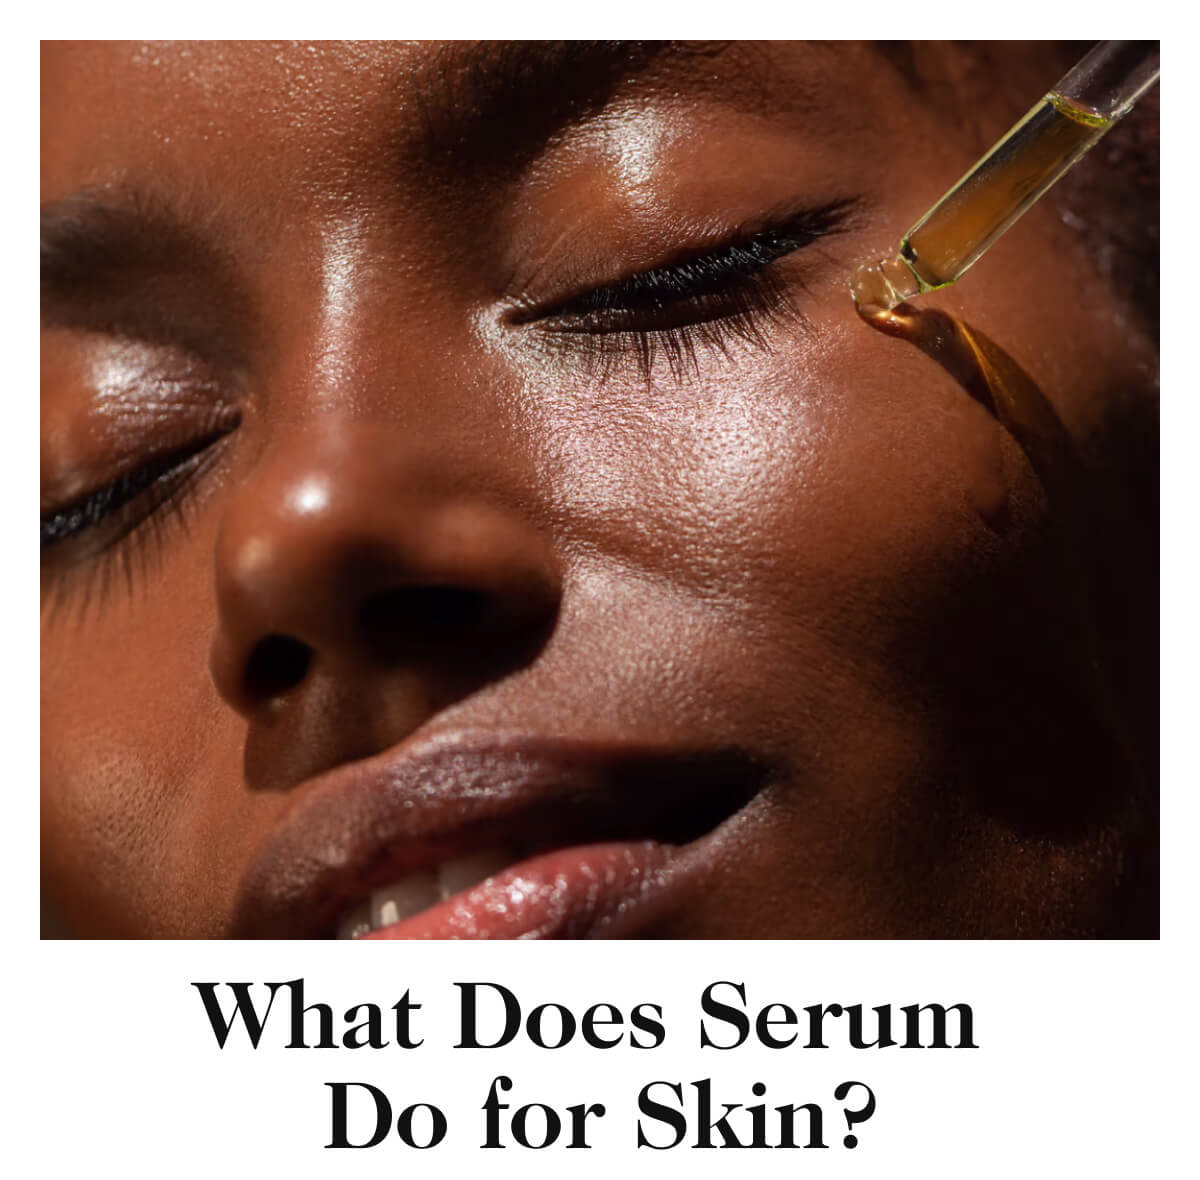 What Does Serum Do for Skin?